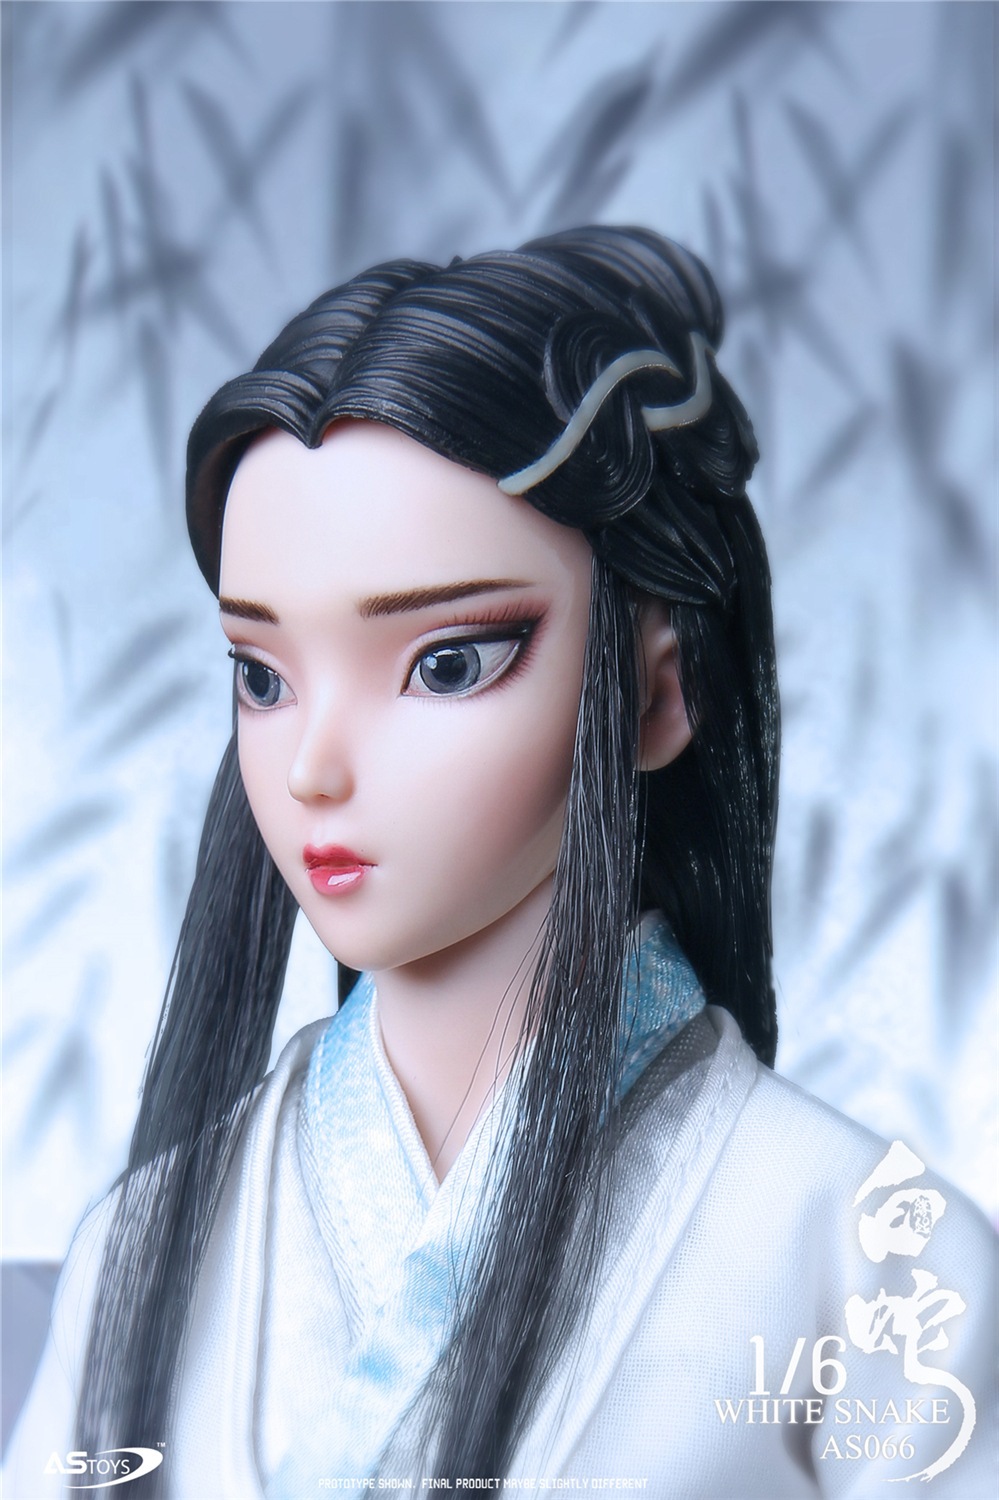 fantasy - NEW PRODUCT: ASToys: 1/6 "White Snake" Action Figure #AS066 19104012